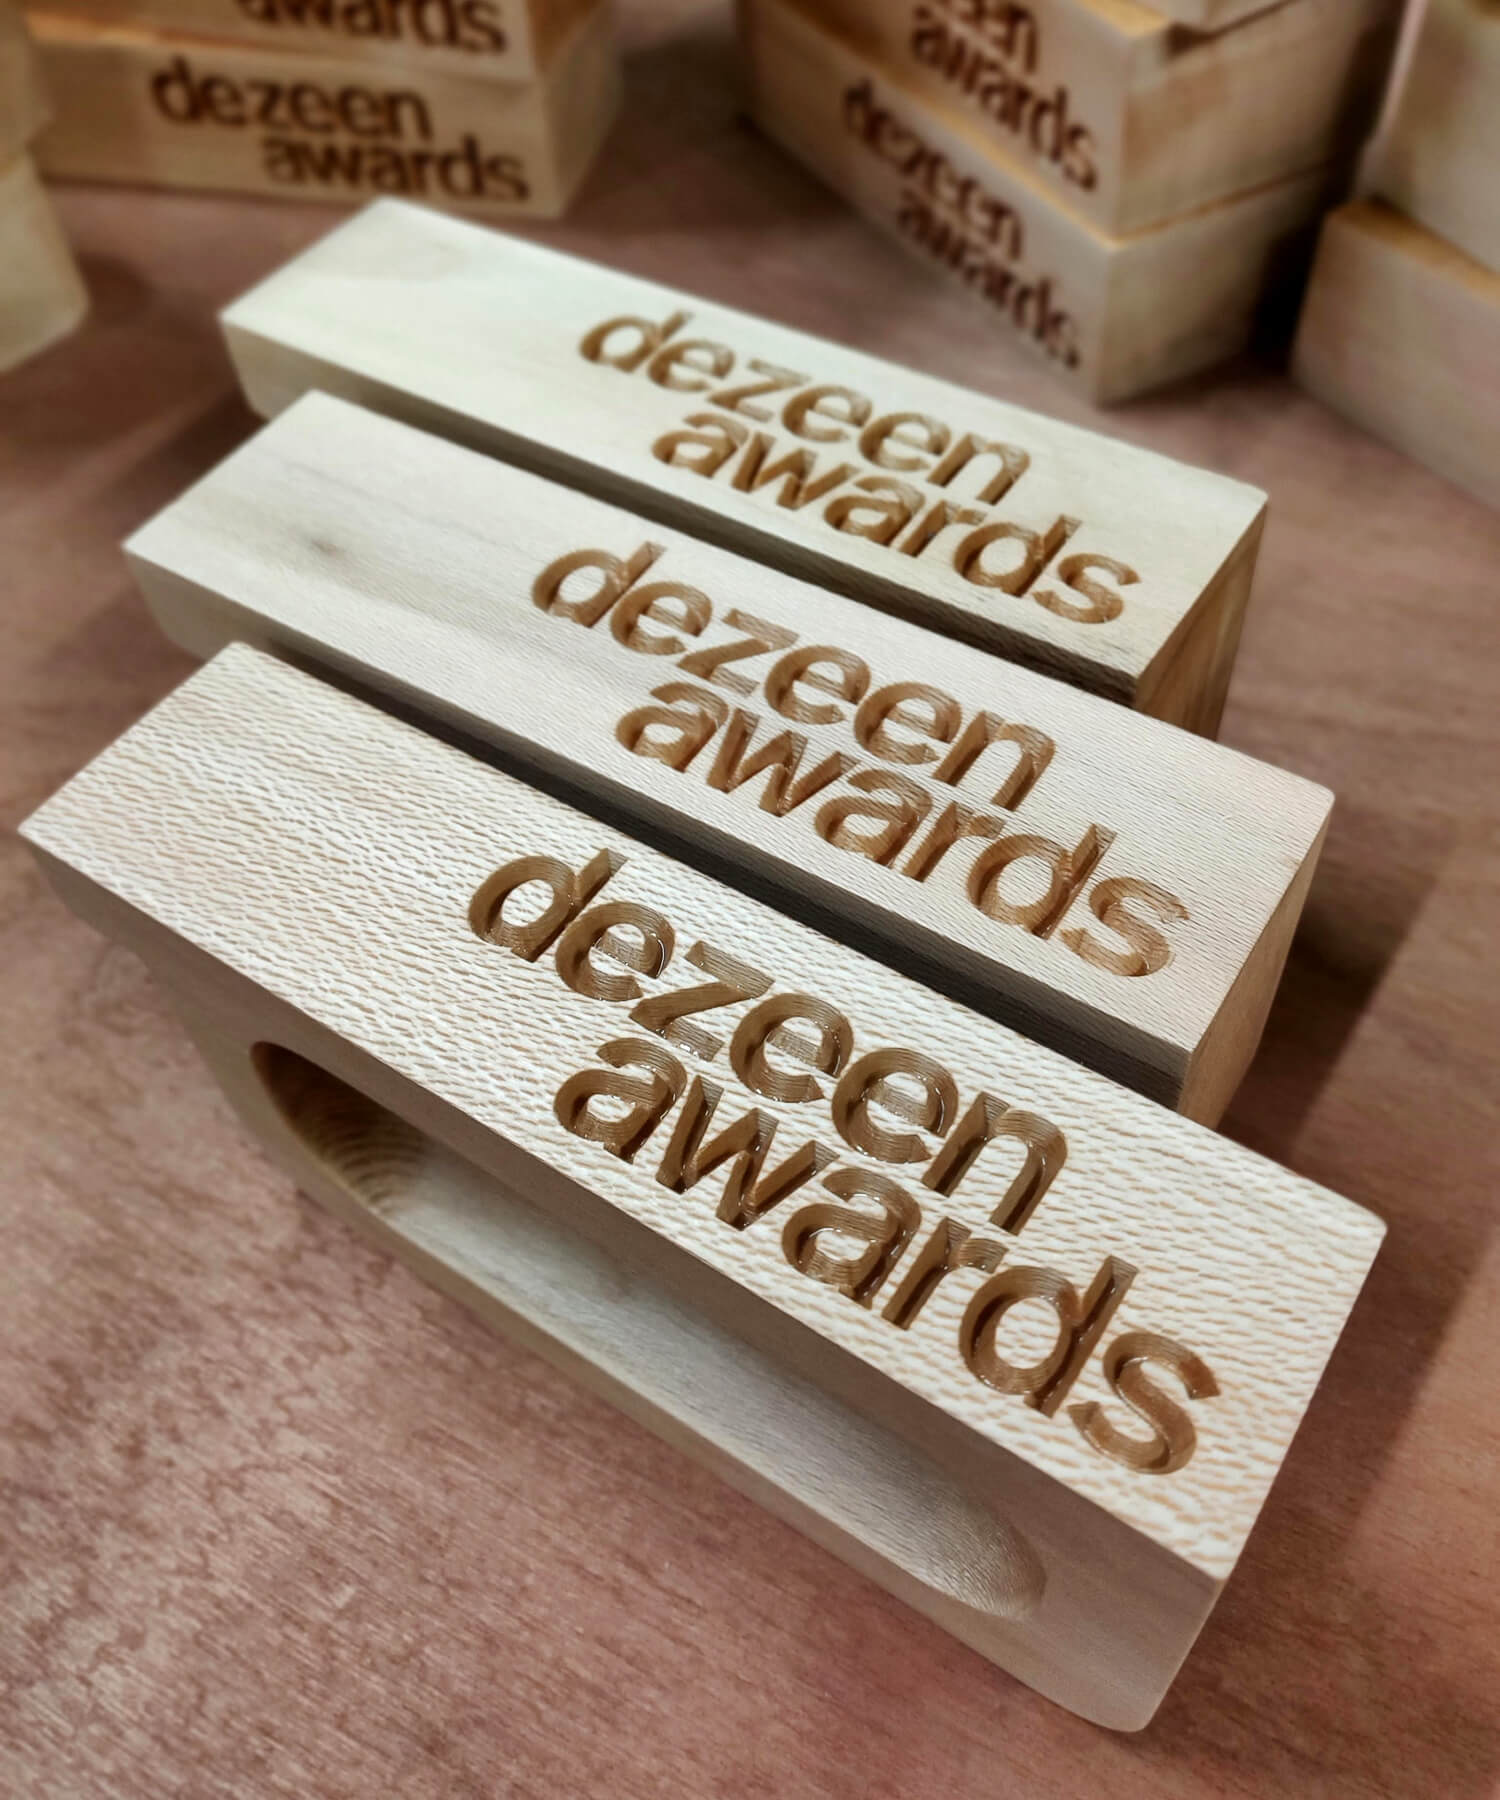 Dezeen awards trophies crafted using London plane timber